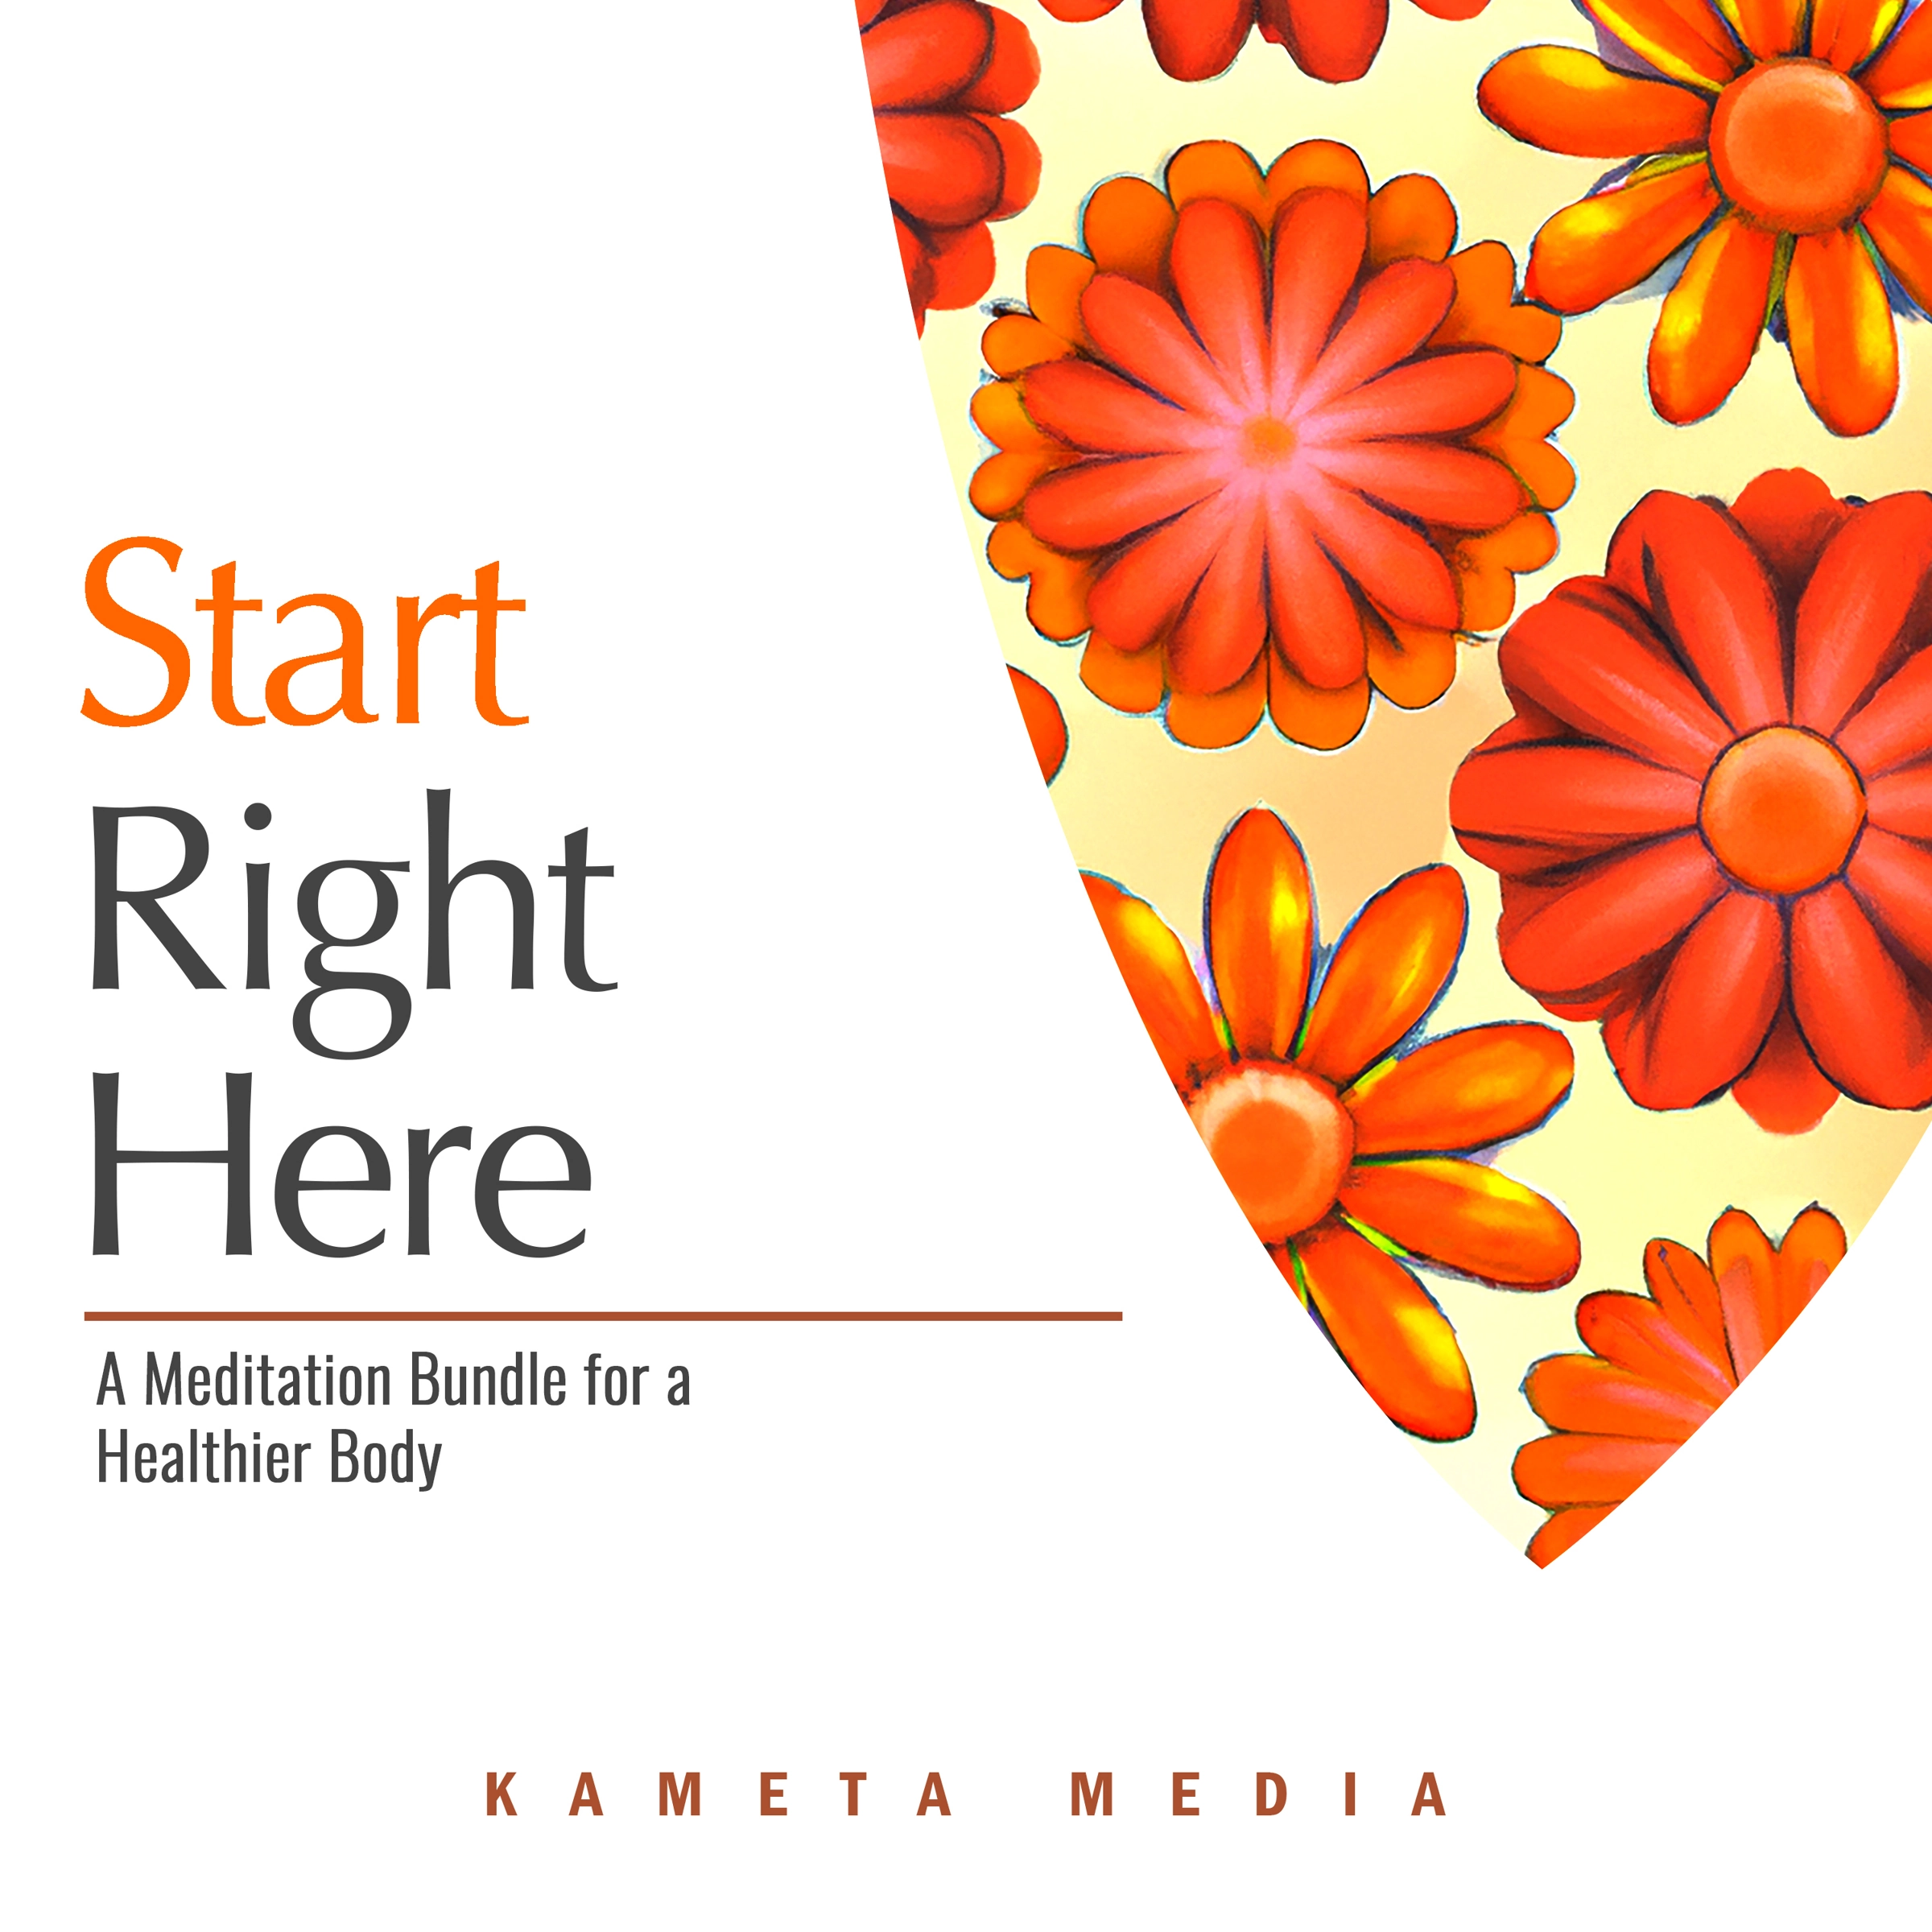 Start Right Here: A Meditation Bundle for a Healthier Body Audiobook by Kameta Media